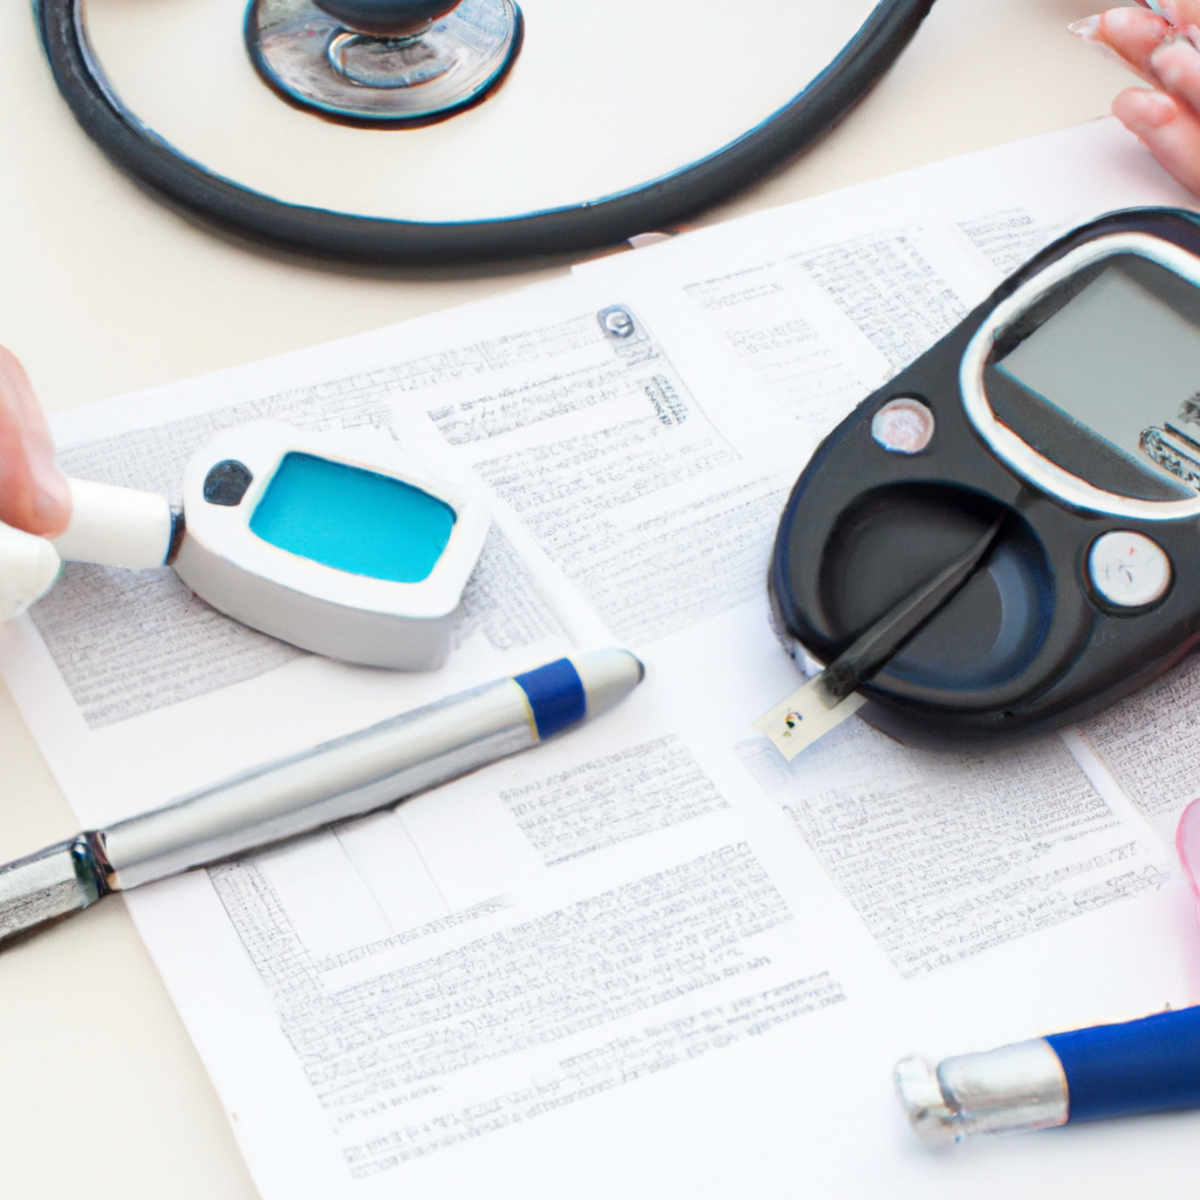 Comprehensive diabetes management tools in a clinical setting - Cystic Fibrosis-Related Diabetes (CFRD)